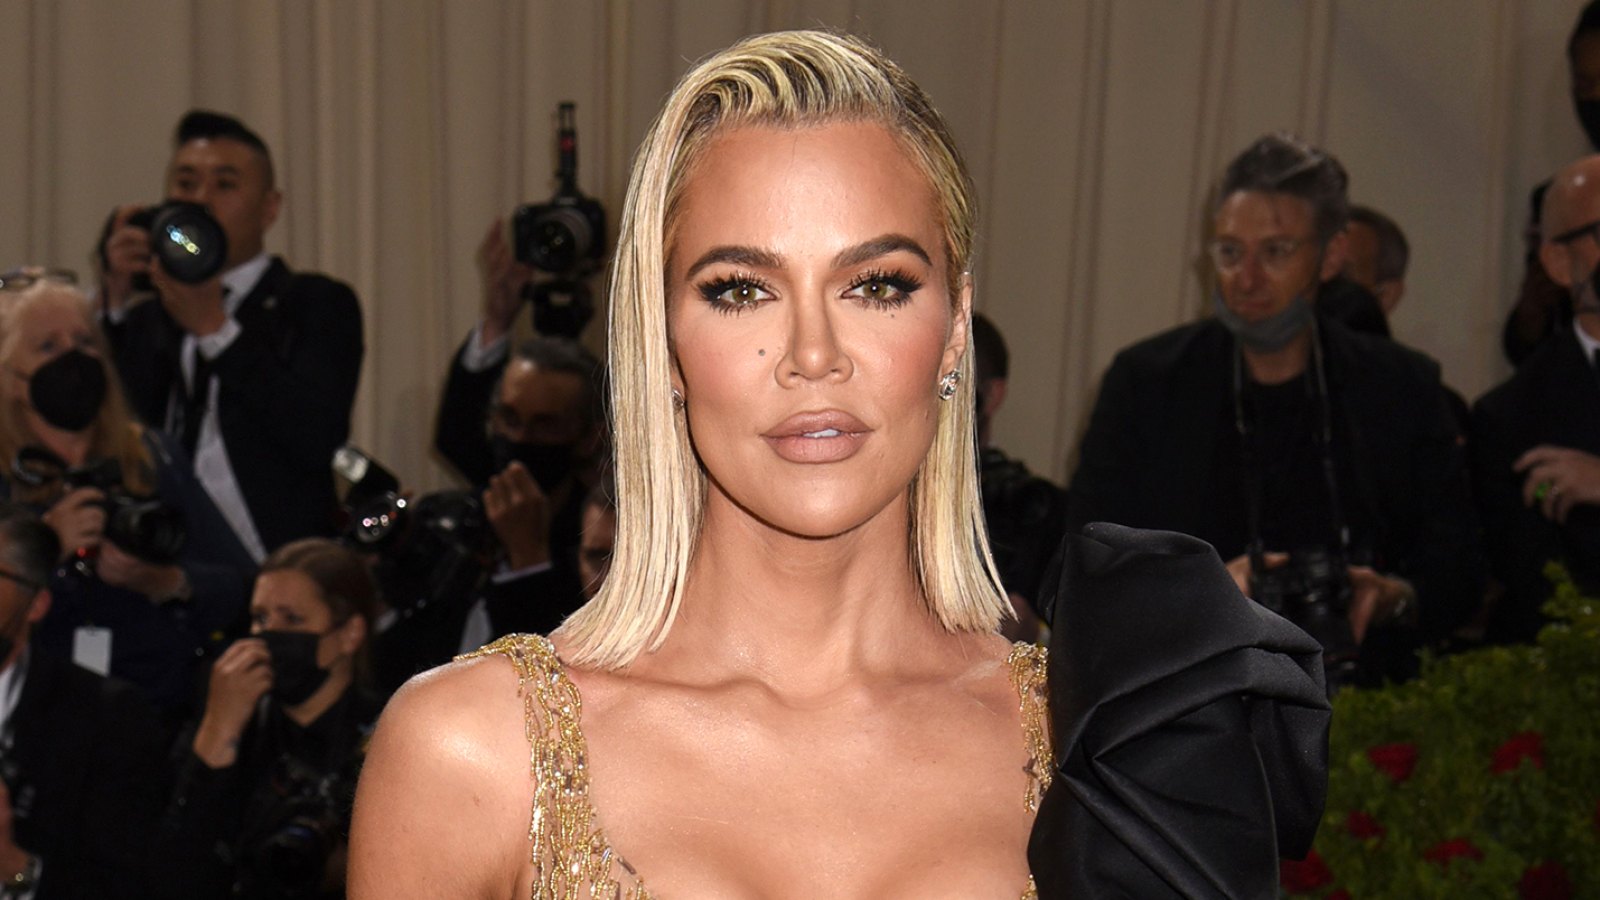 Khloe Kardashian Shares Cryptic Relationship Advice About Falling in Love With Someone Who Doesn’t ‘Appreciate’ You